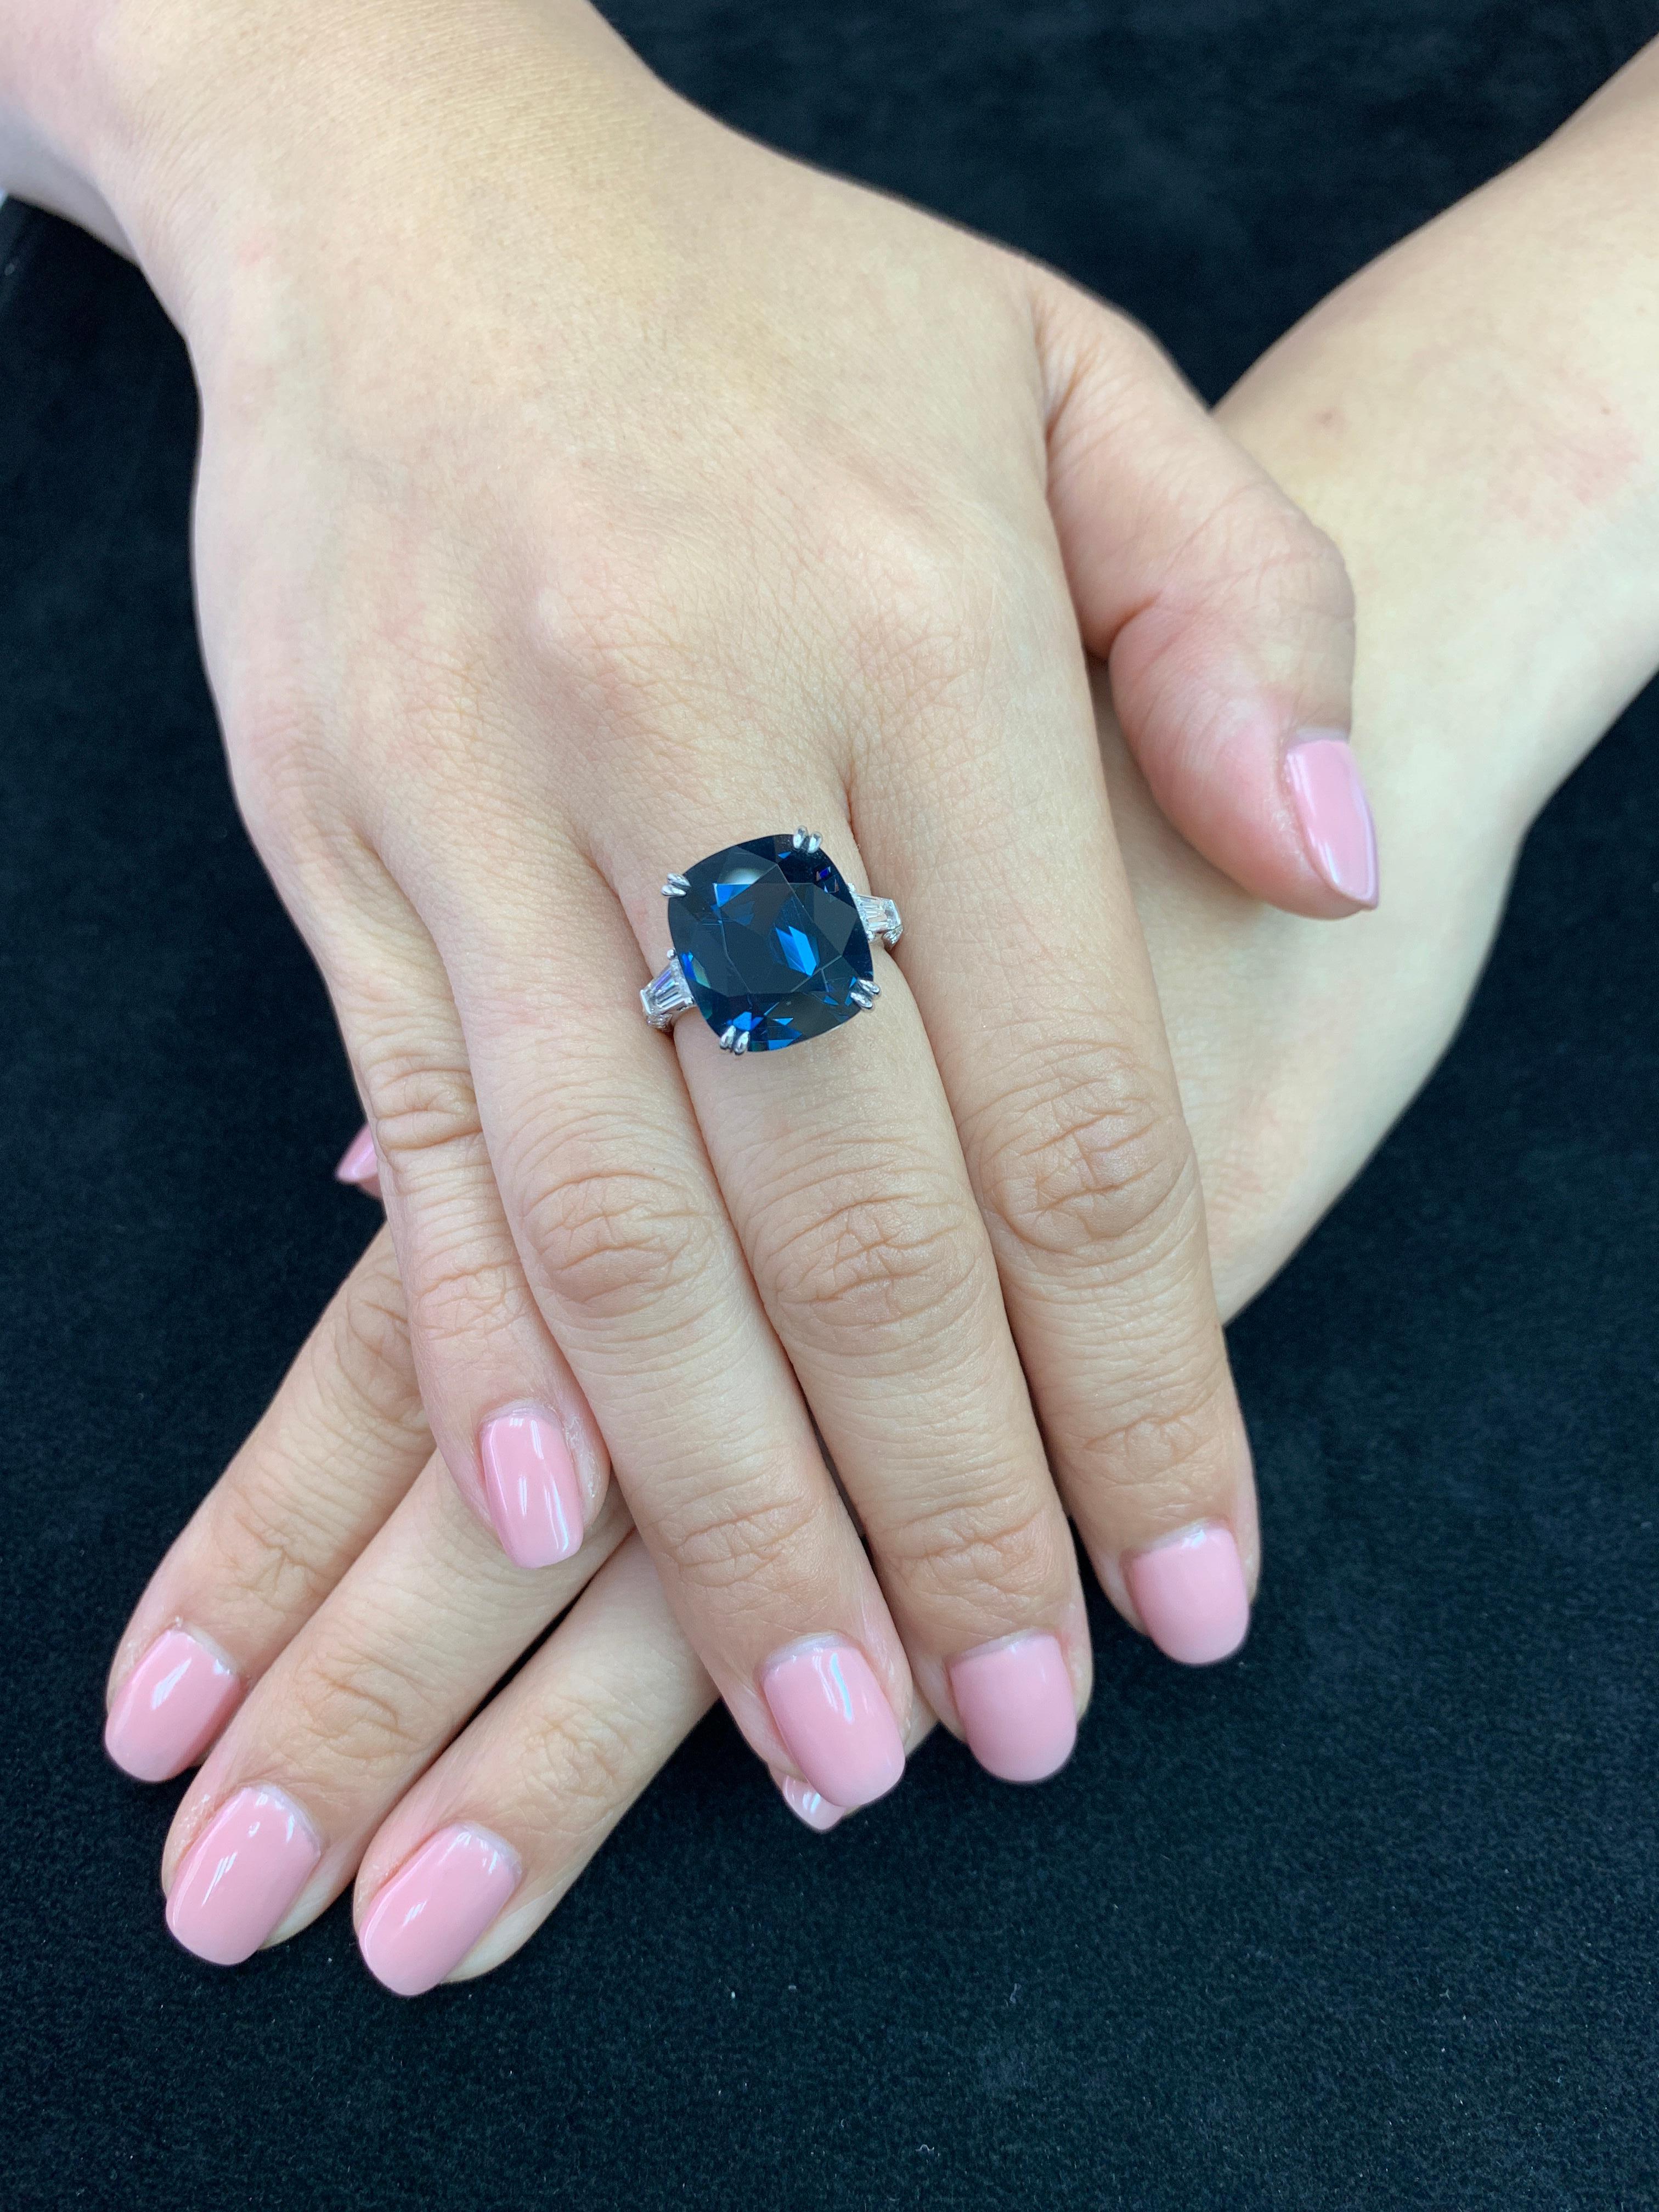 PLEASE CHECK OUT THE HD VIDEO!  This is a world class cobalt spinel! Certified by 2 labs to be a natural Cobalt Spinel without treatments. Oversized at 10.10Cts The ring is set in 18k white gold and diamonds. Two tapered Baguettes 0.54Cts and